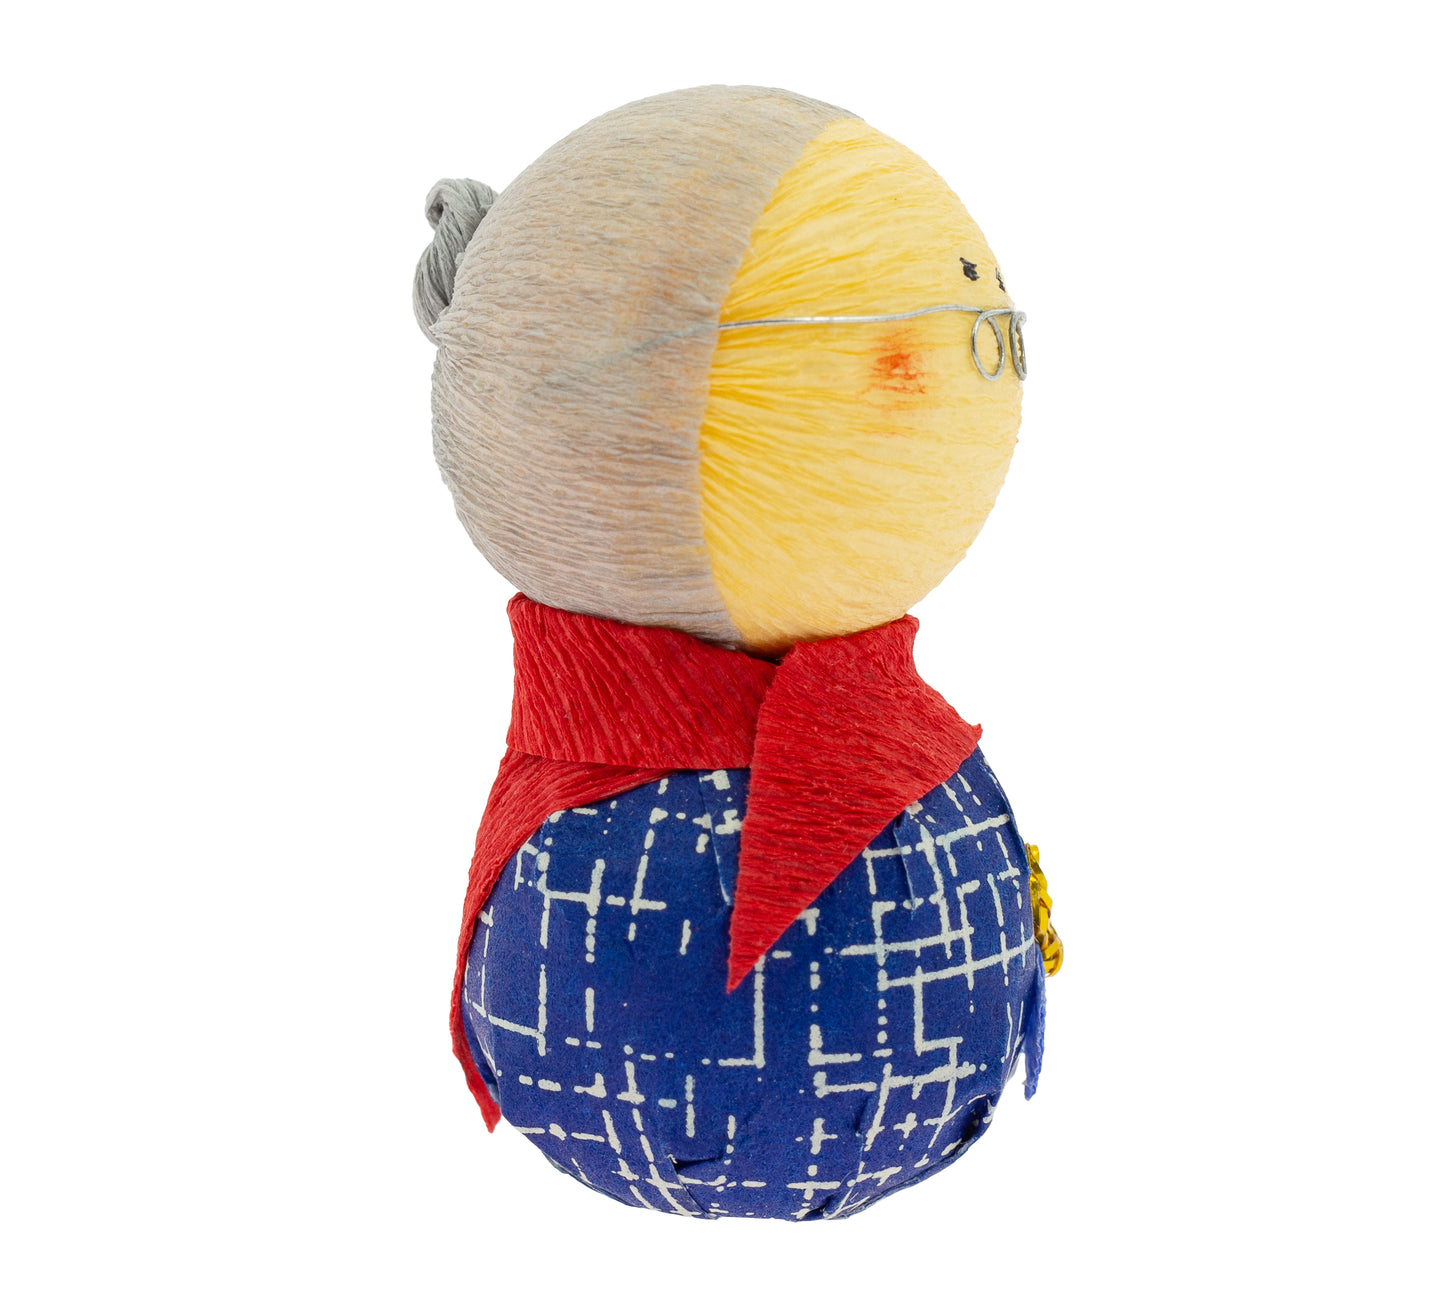 Okiagari Roly-poly Doll - Grandmother Sobo